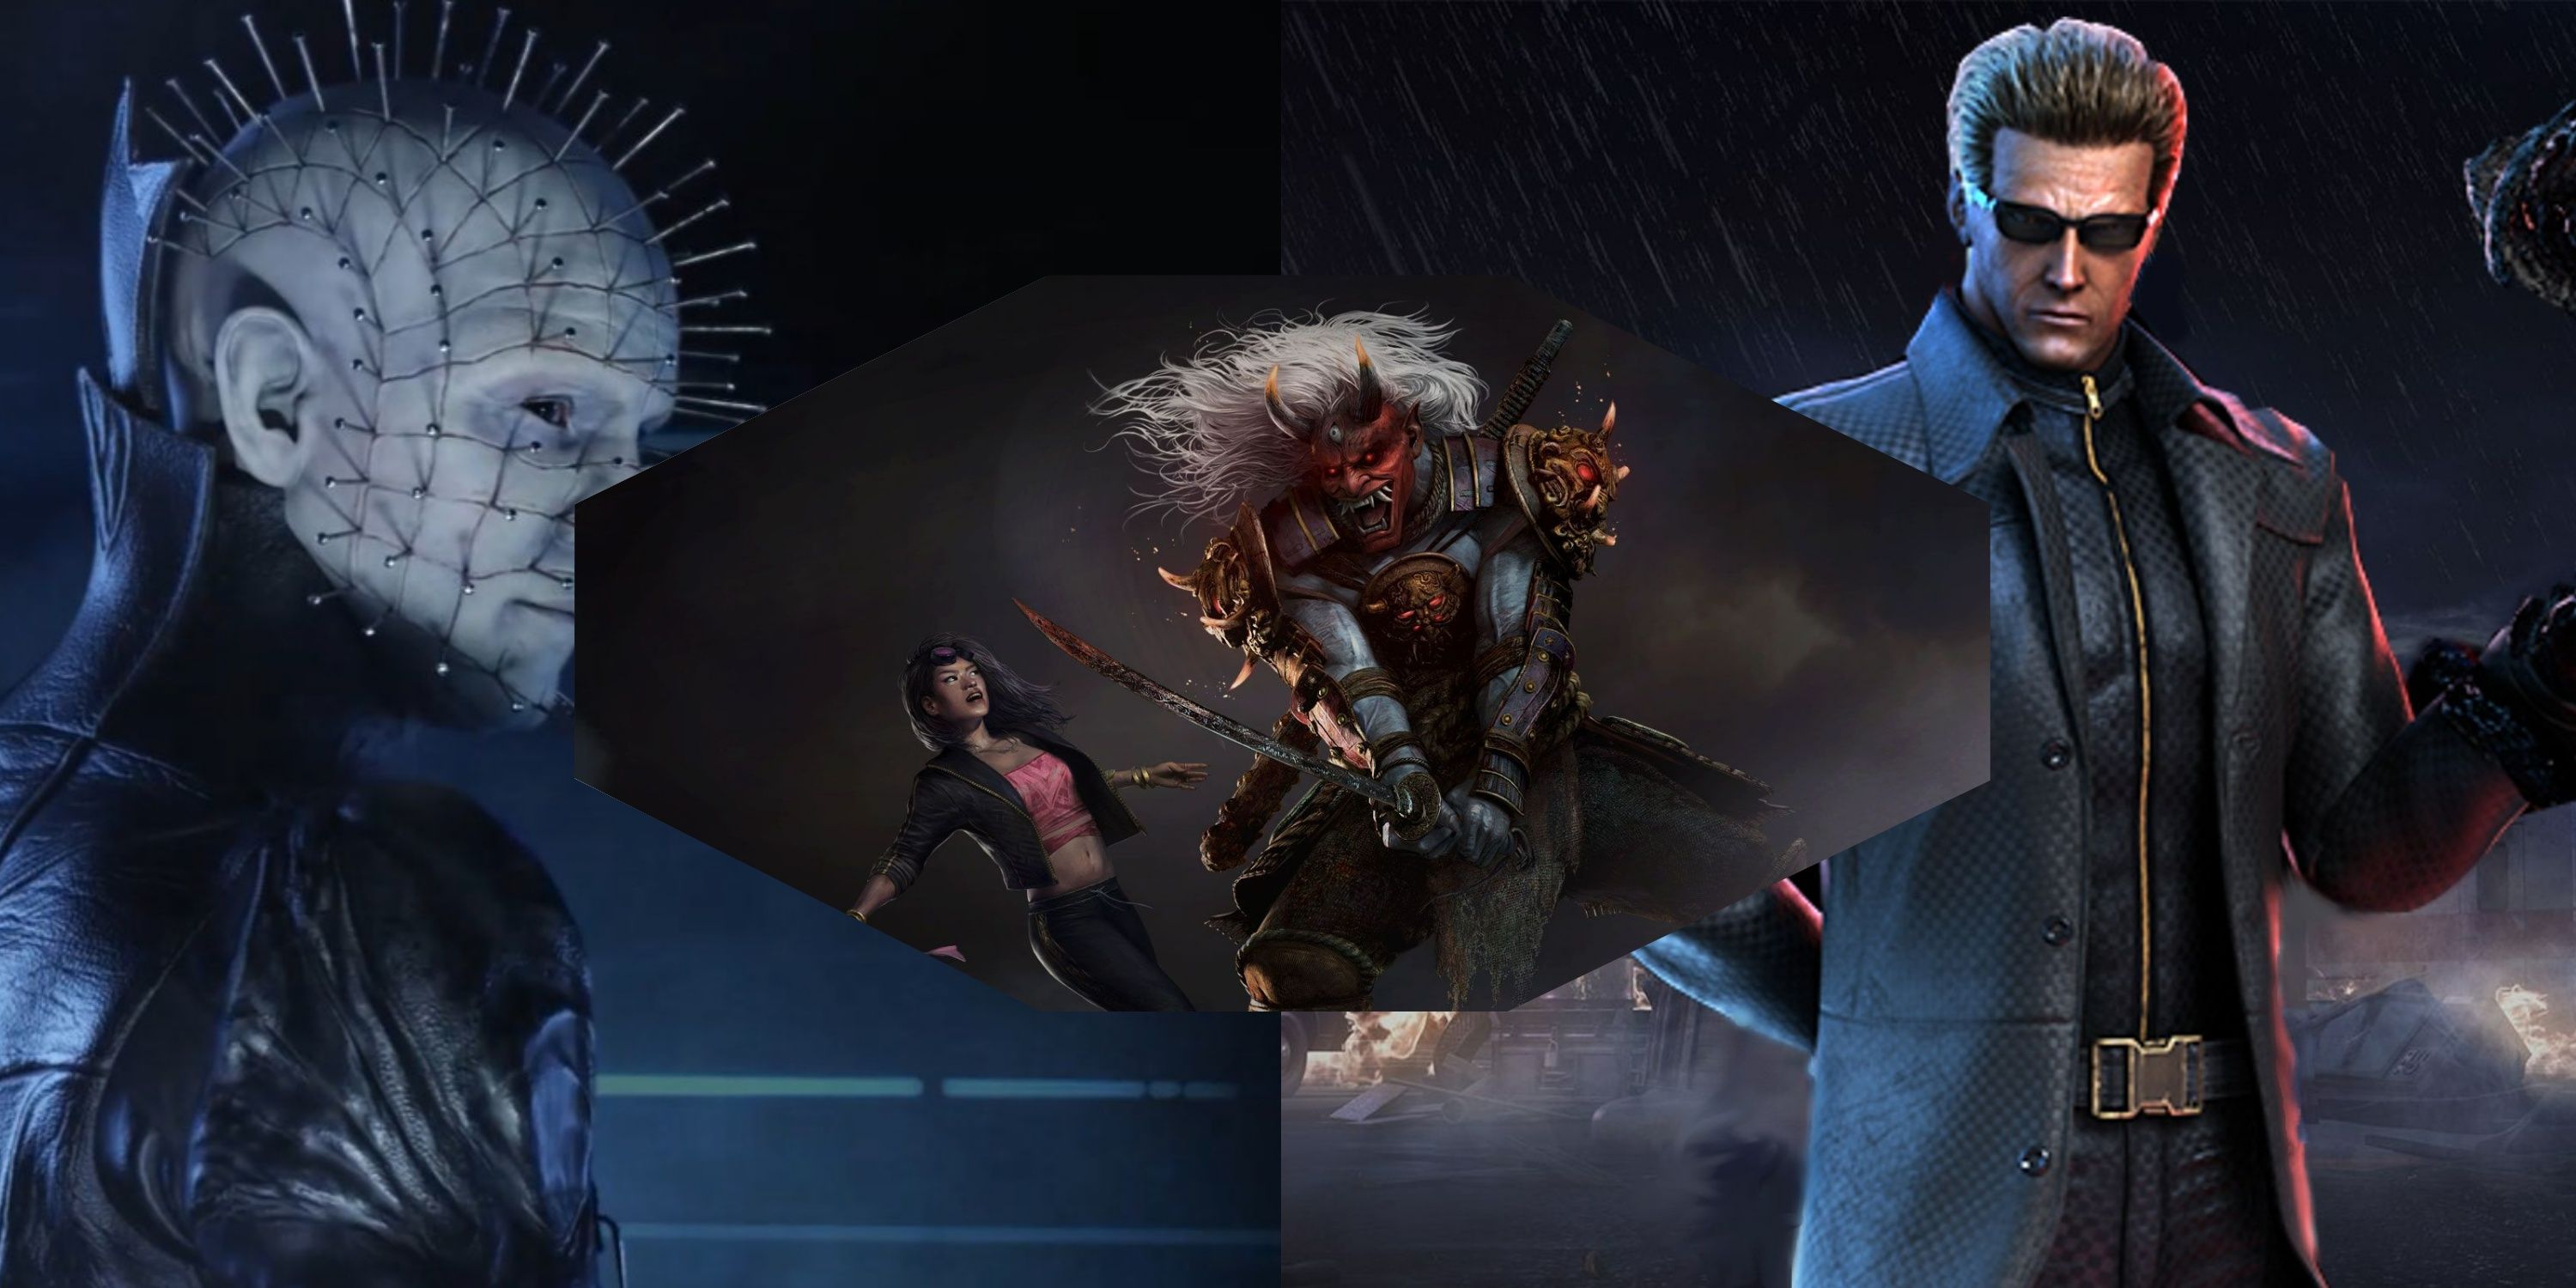 The Cenobite, The Oni, and The Mastermind Dead By Daylight Collage